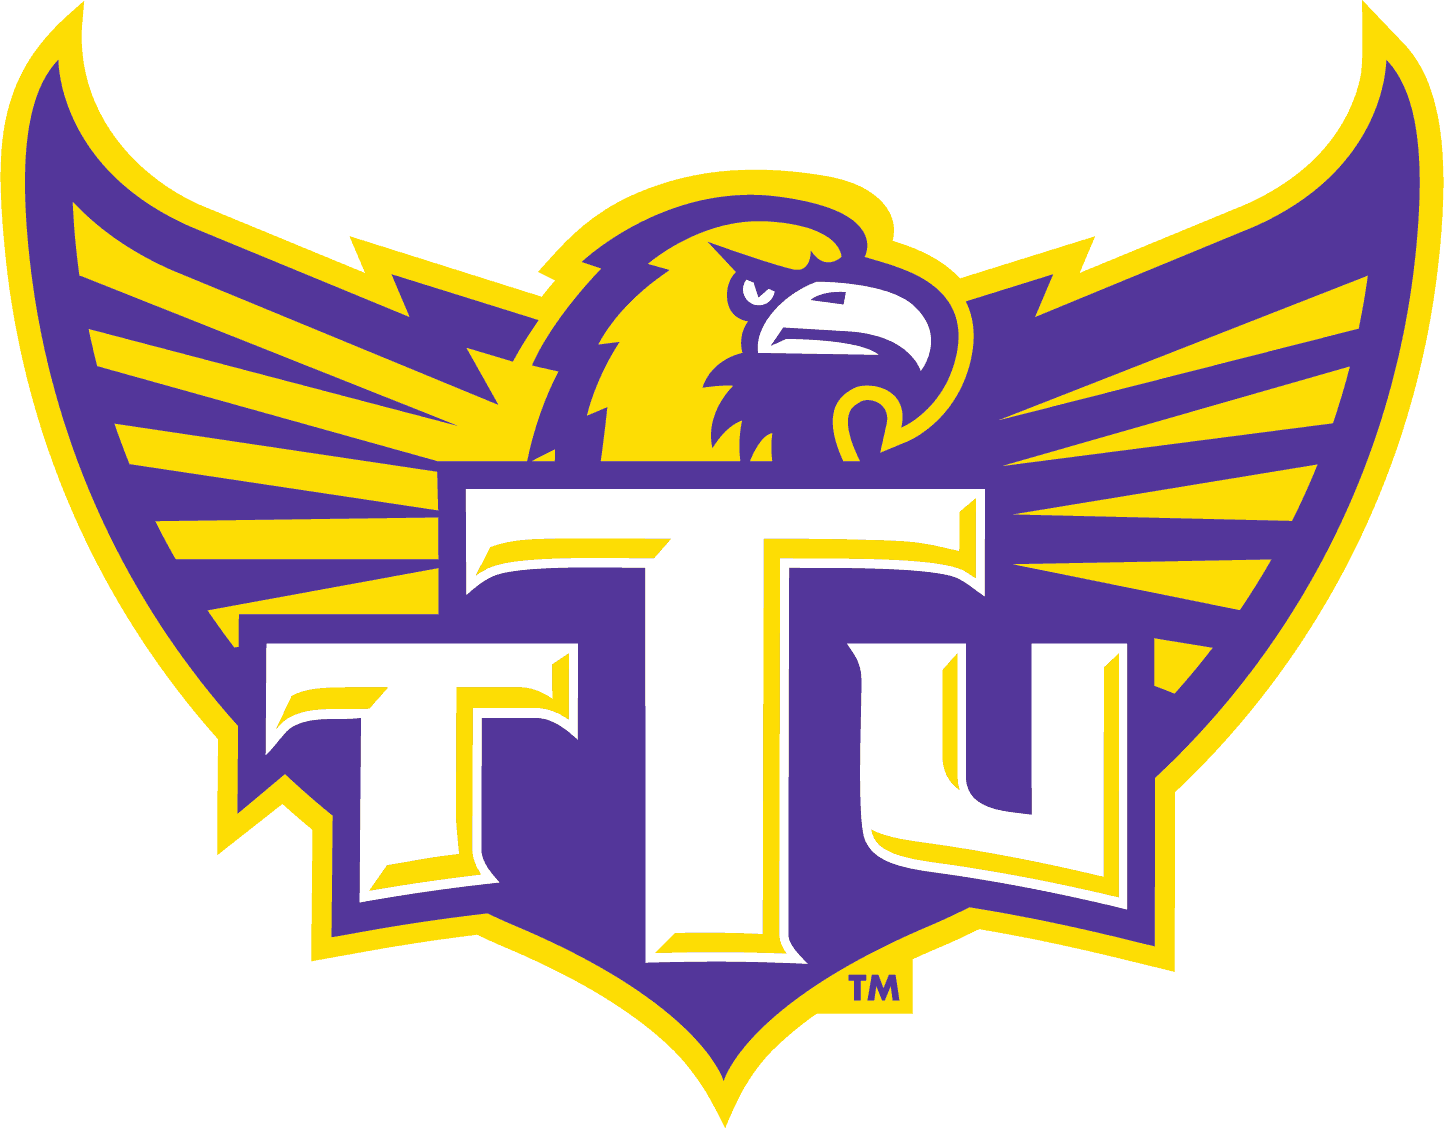 Tennessee Tech Golden Eagles Logo png